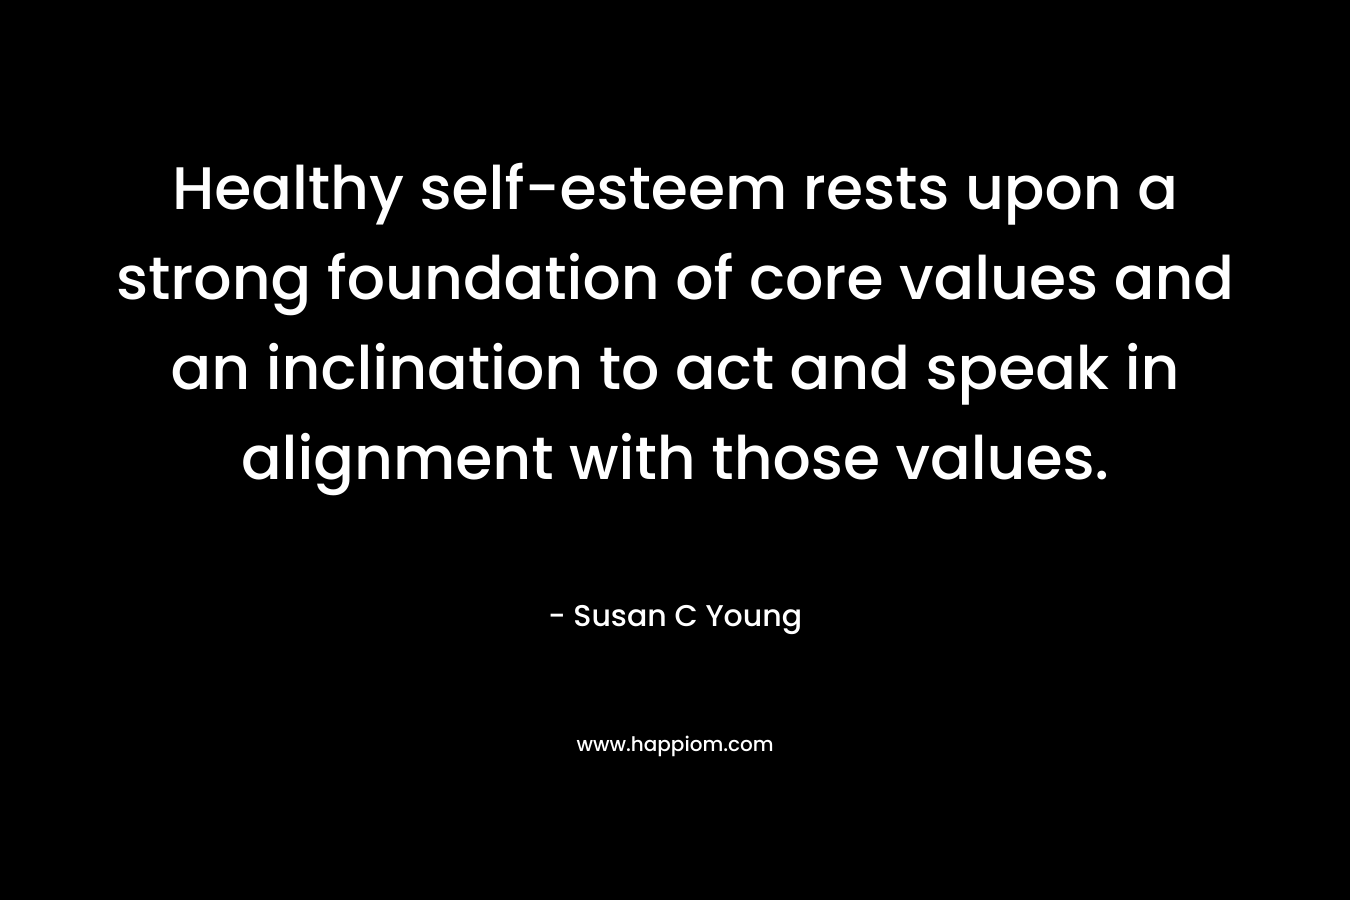 Healthy self-esteem rests upon a strong foundation of core values and an inclination to act and speak in alignment with those values. – Susan C Young